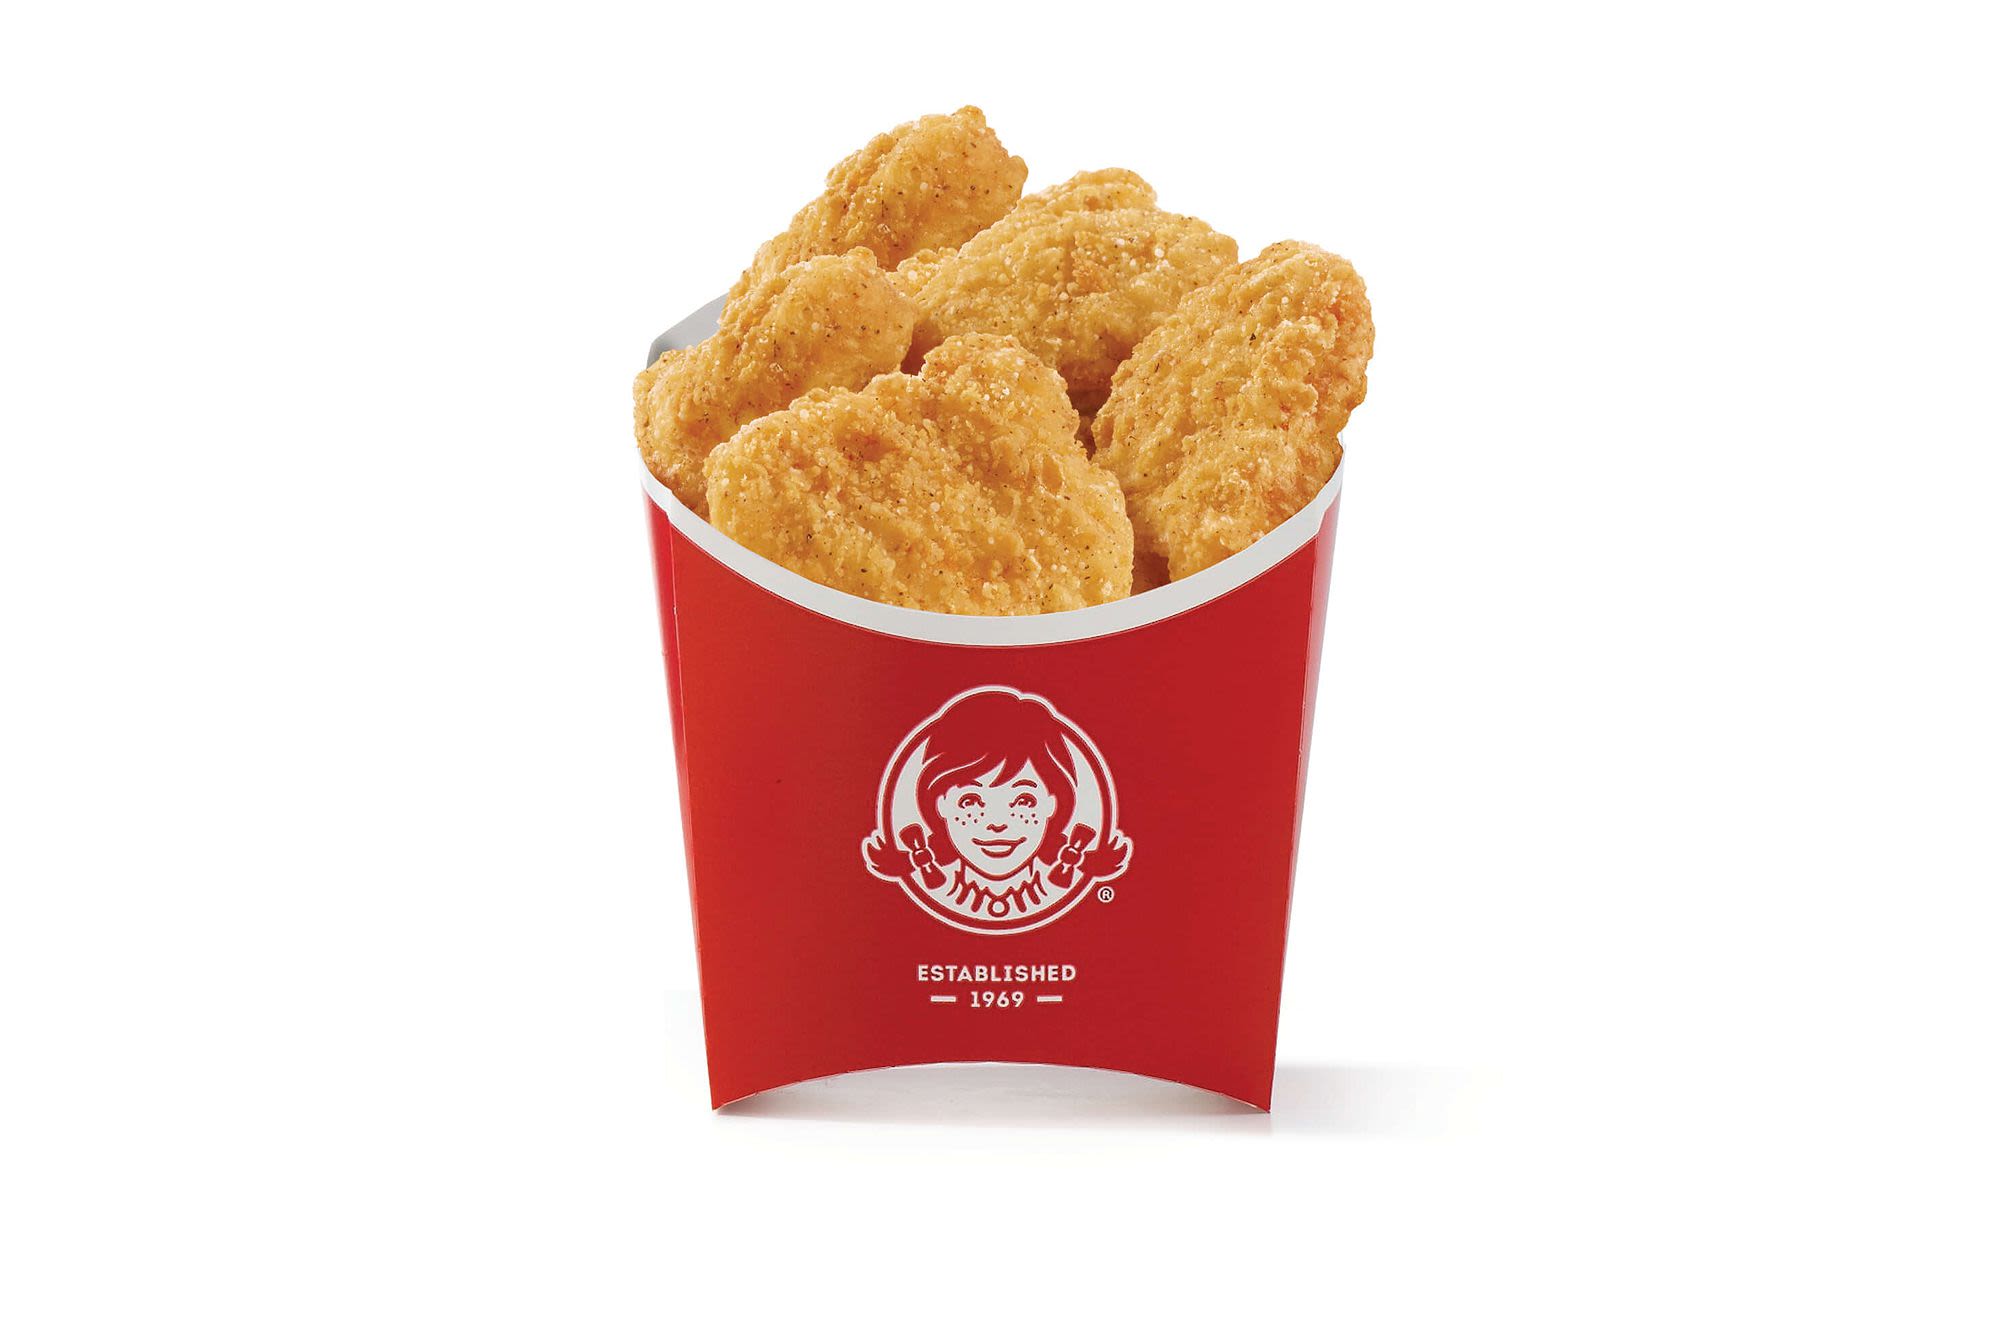 Wendy’s Has Free 6-Piece Chicken Nuggets Every Wednesday for the Rest of the Year